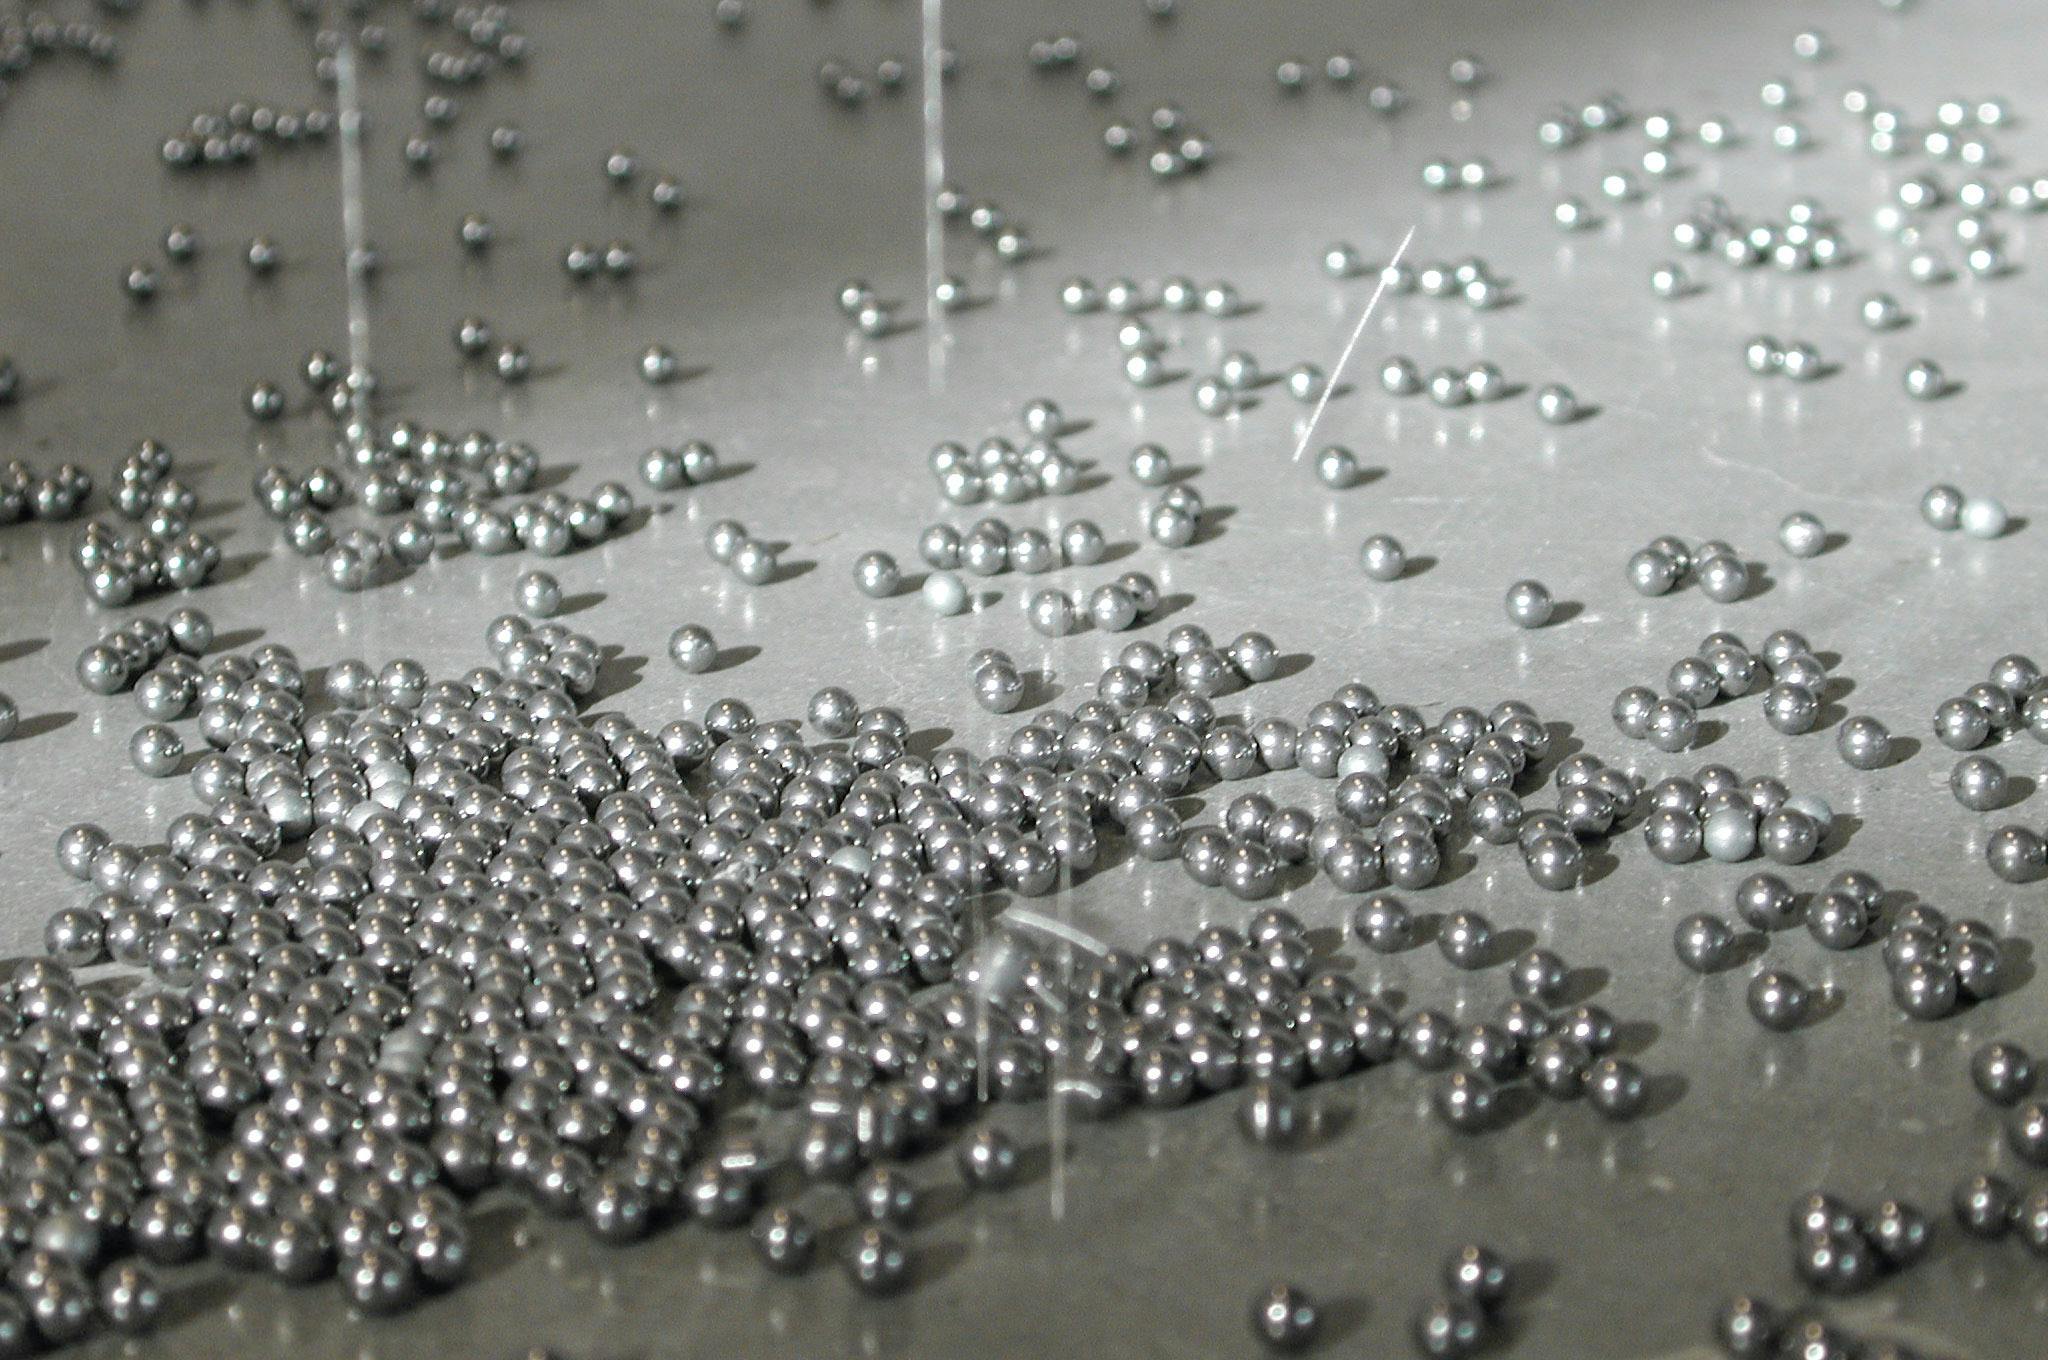 A number of small steel balls for pinball are scattered on the gallery floor. This is a detailed view showing a collection of steel balls reflecting light in various directions. 